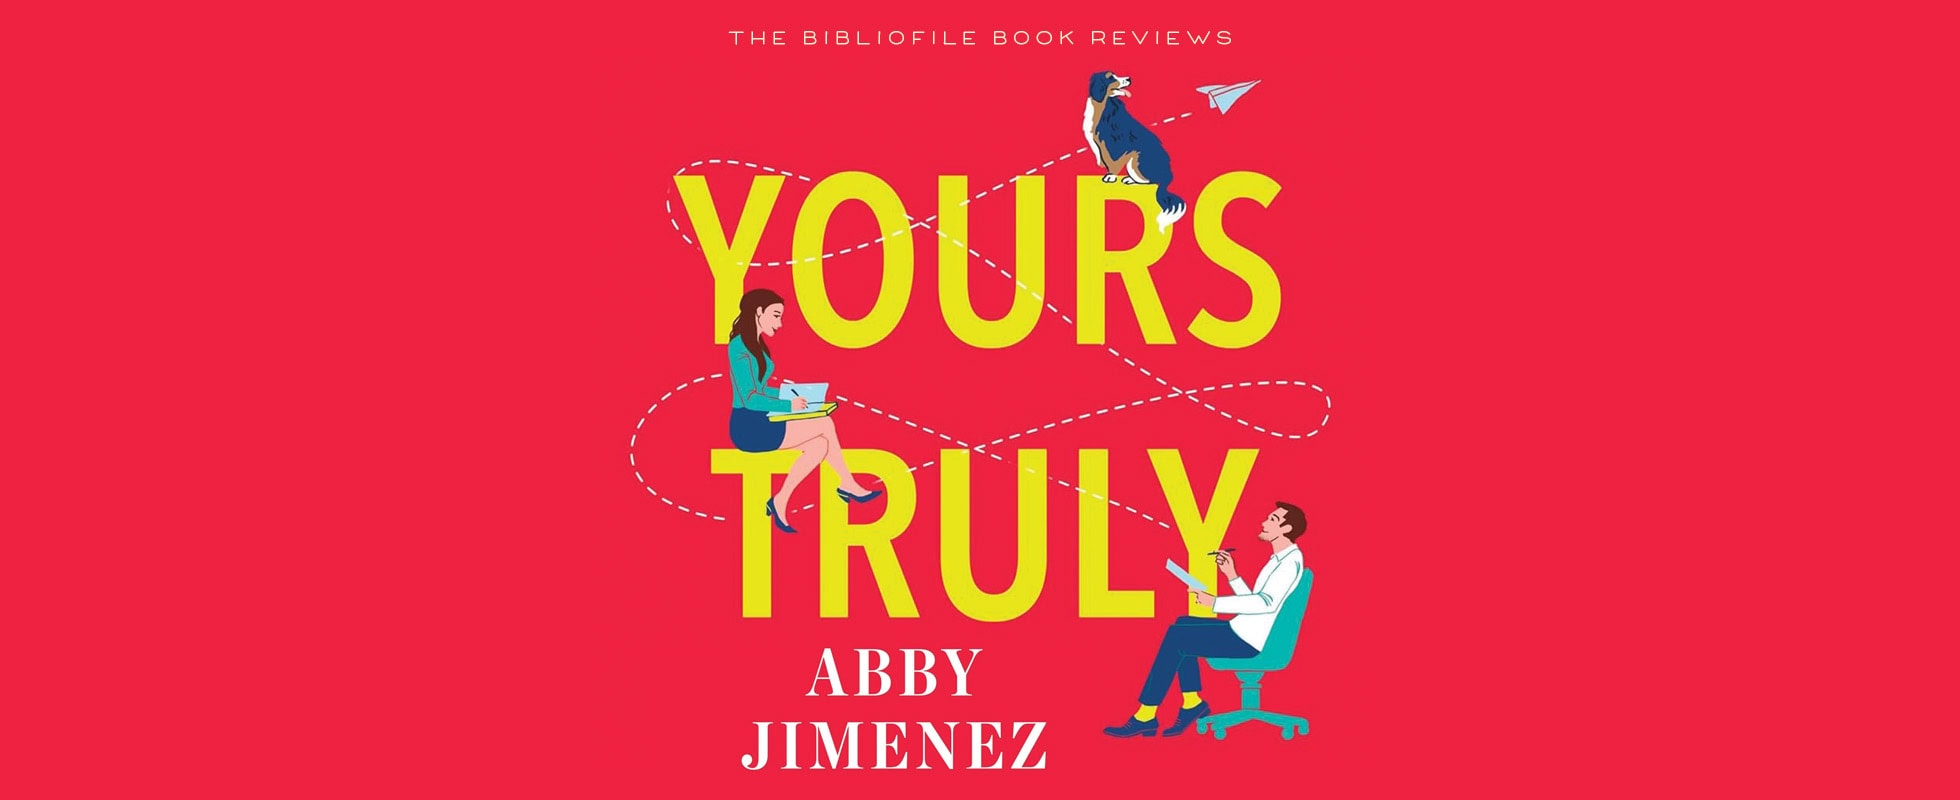 Your Truly abby Jimenez book review plot summary synopsis recap spoilers part of your world series